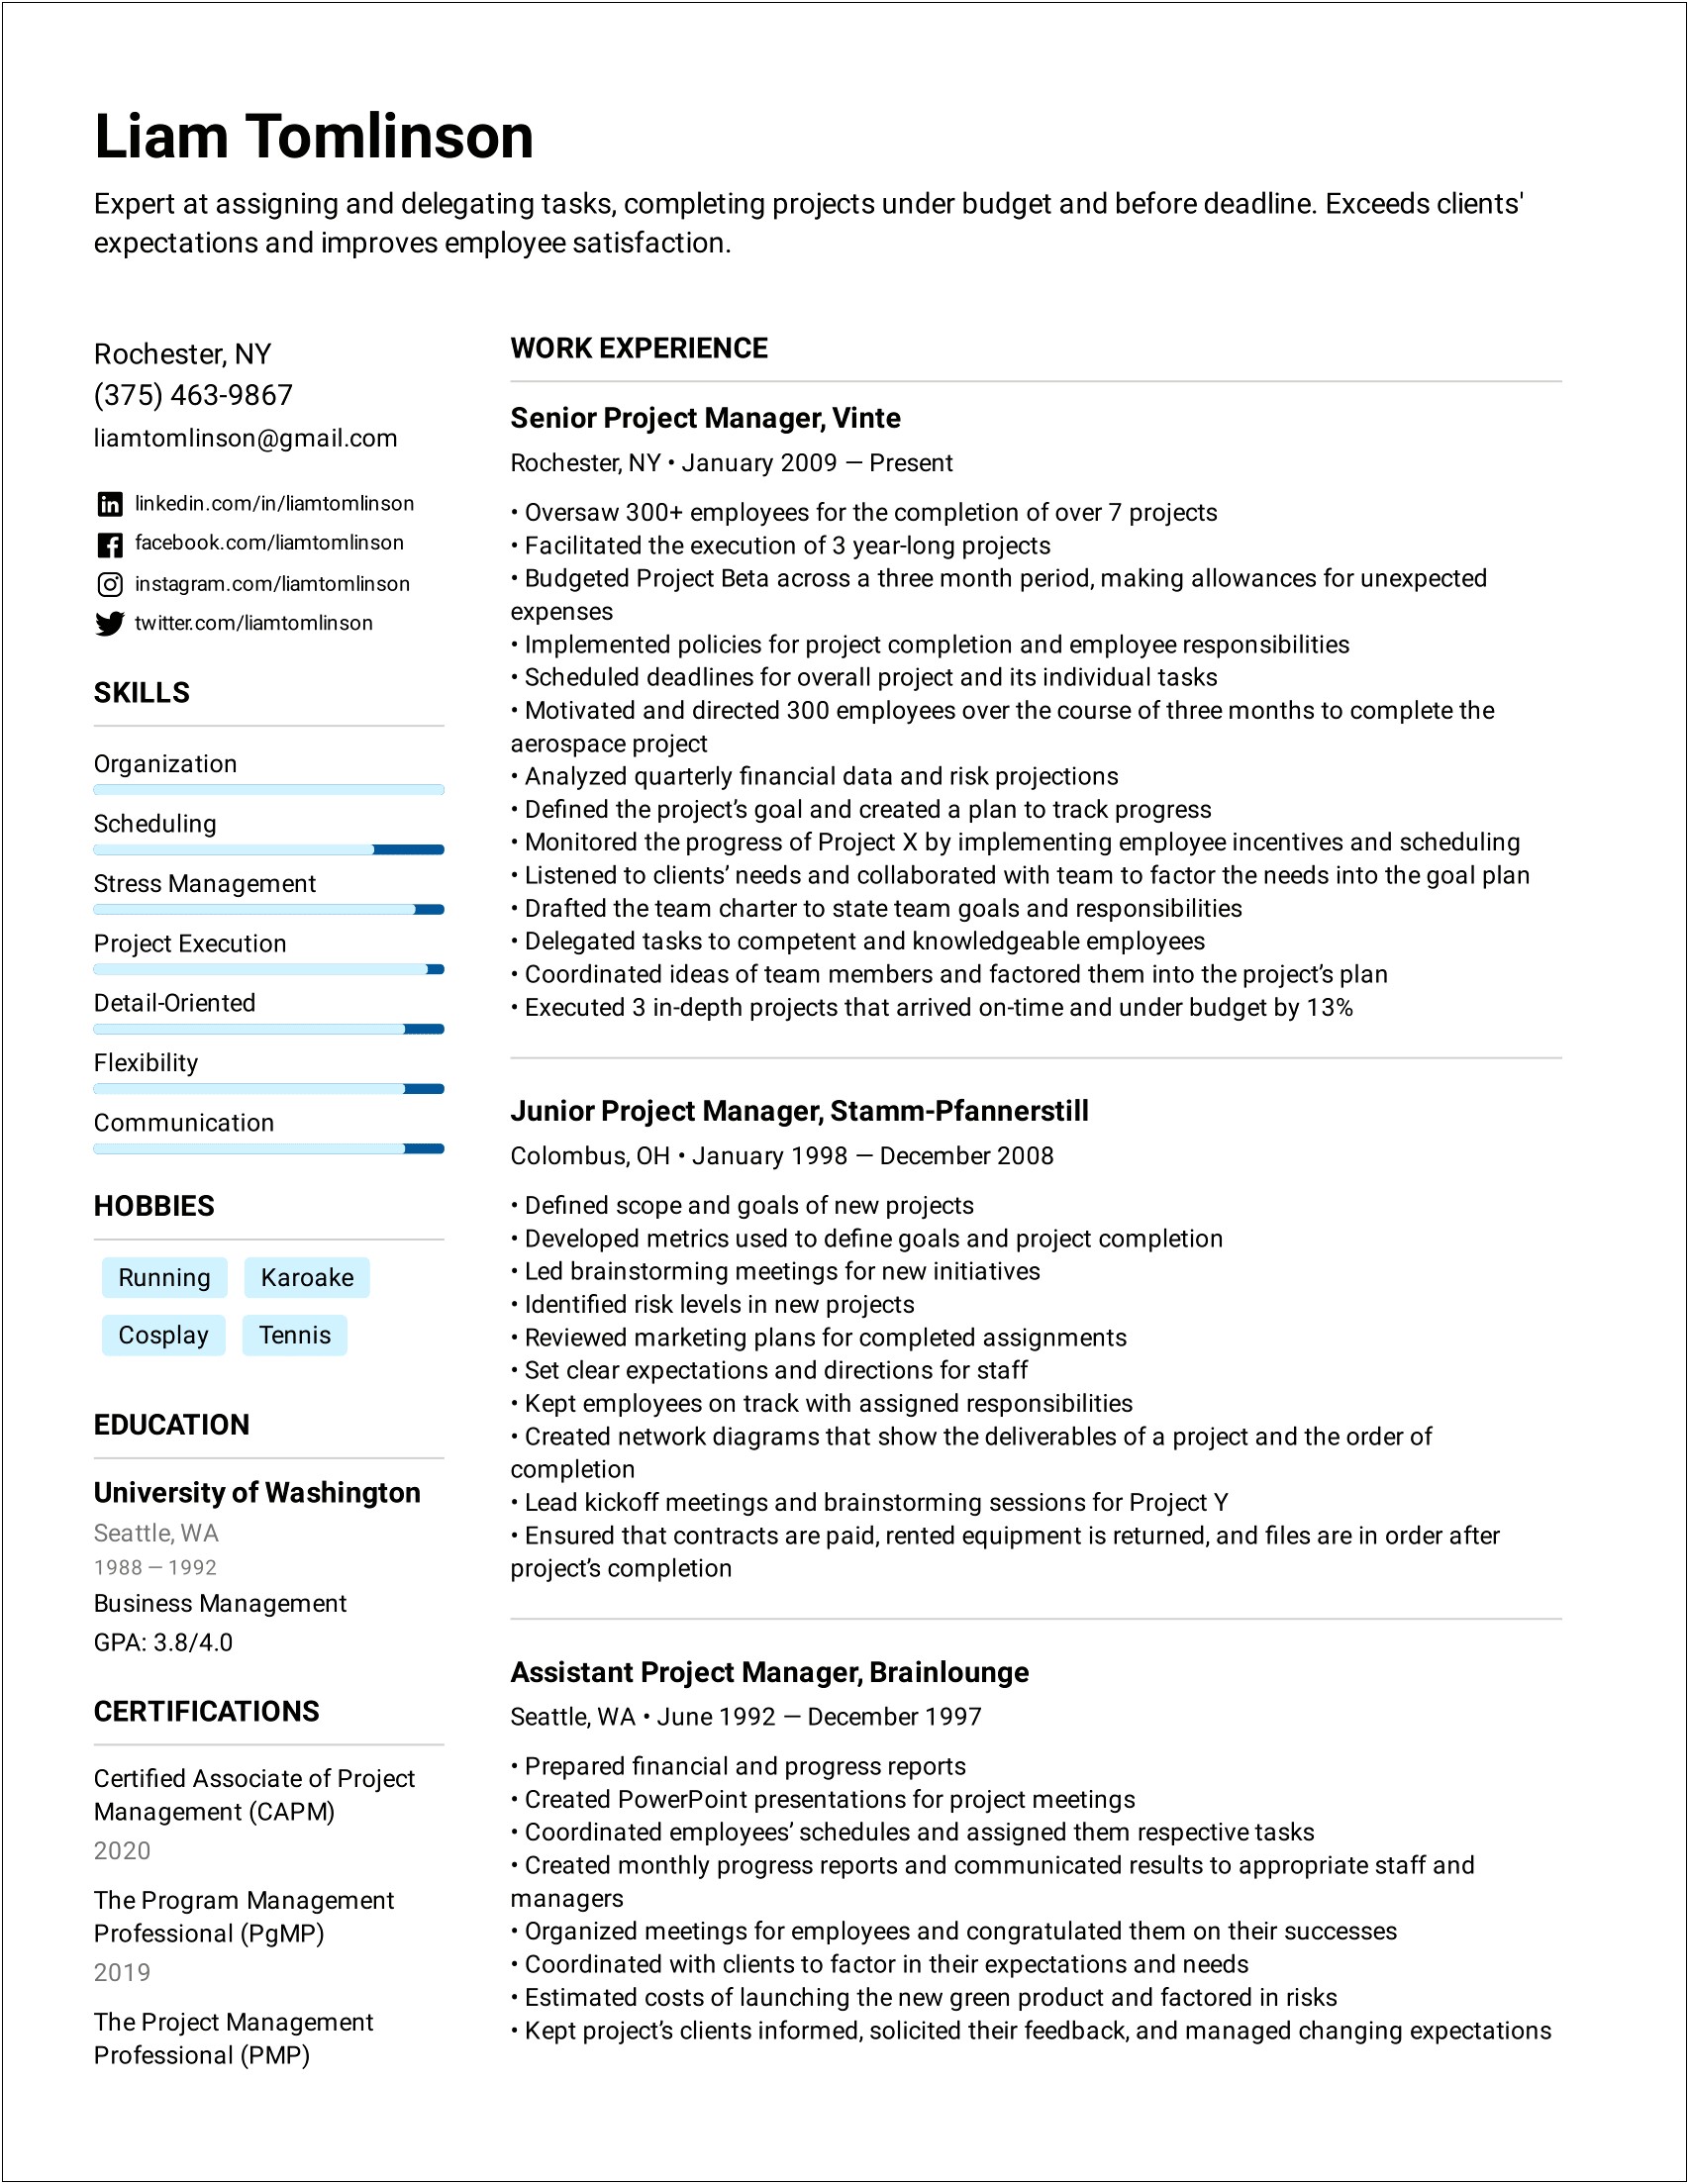 Resume Objective For Construction Manager